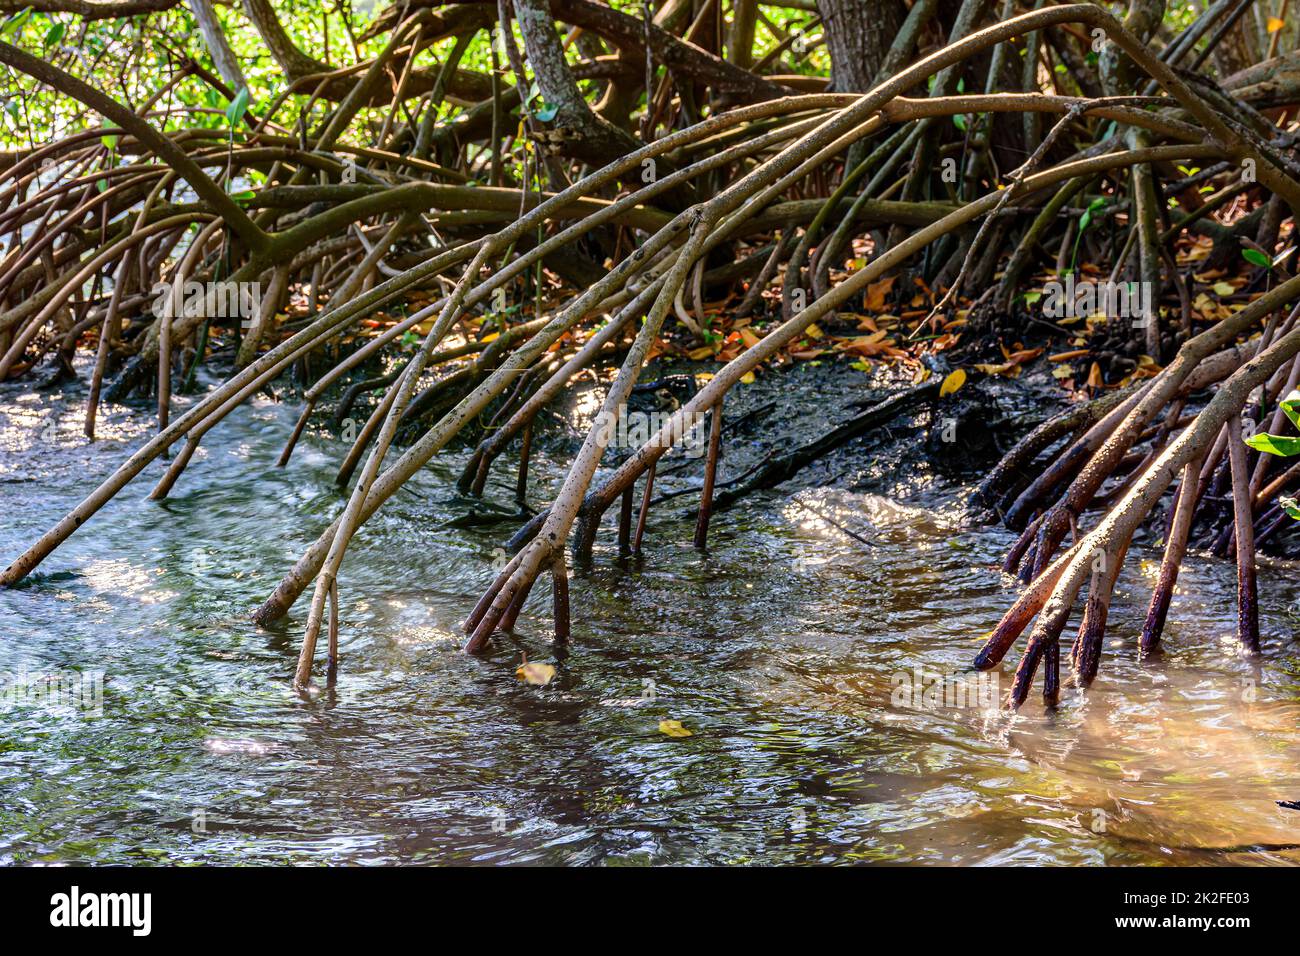 Dense vegetation in the brazilian tropical mangrove forest with its roots Stock Photo